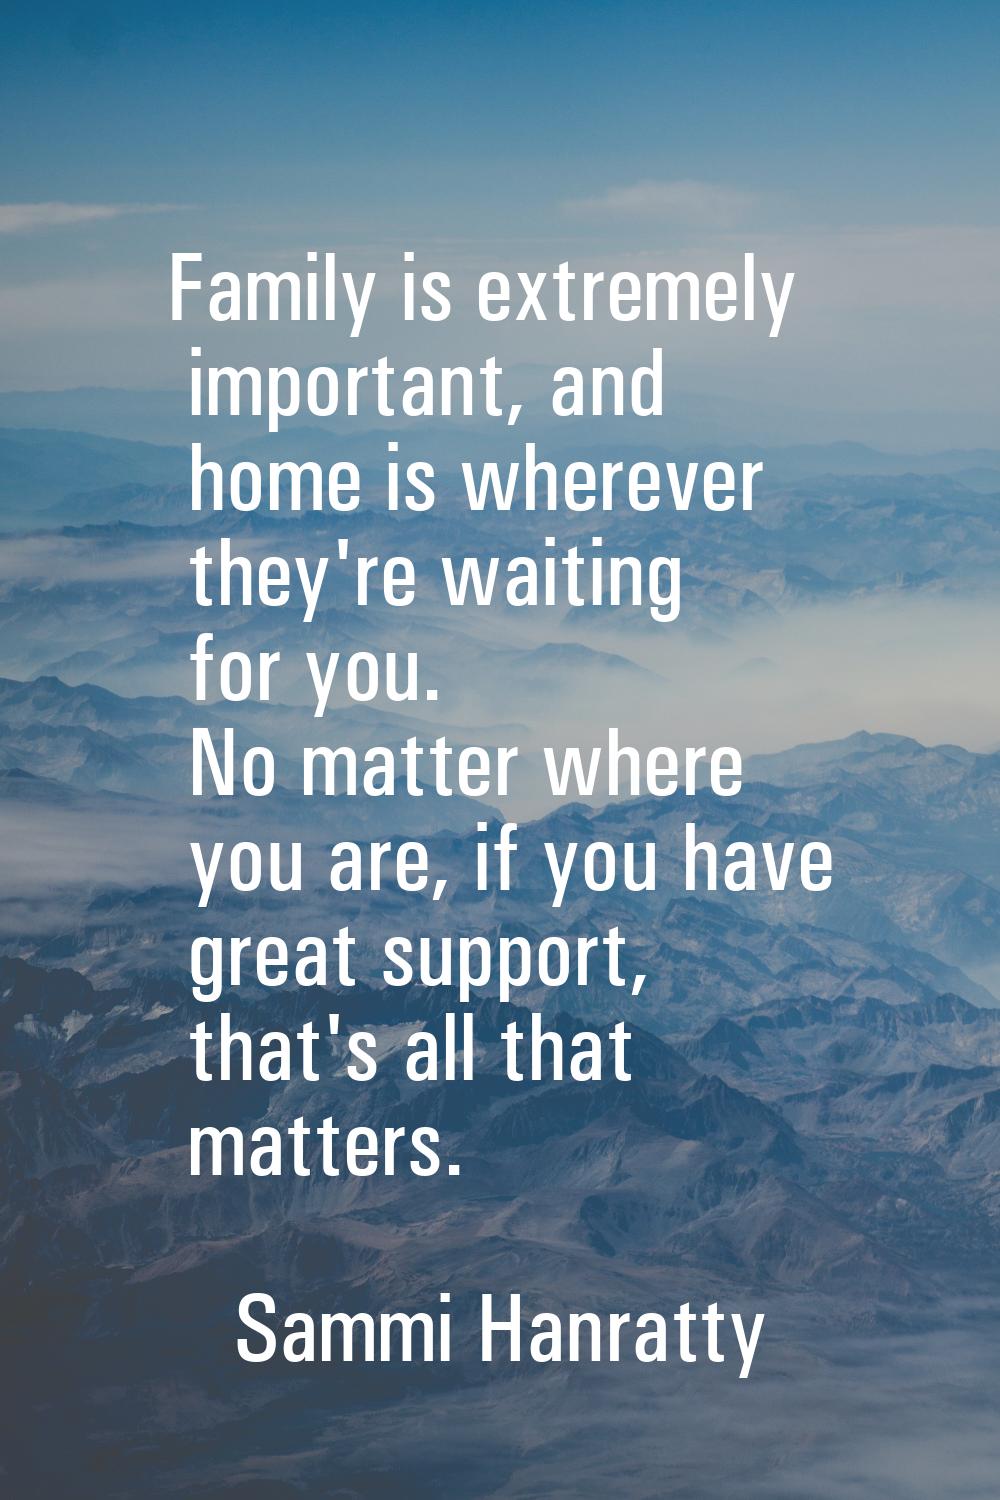 Family is extremely important, and home is wherever they're waiting for you. No matter where you ar